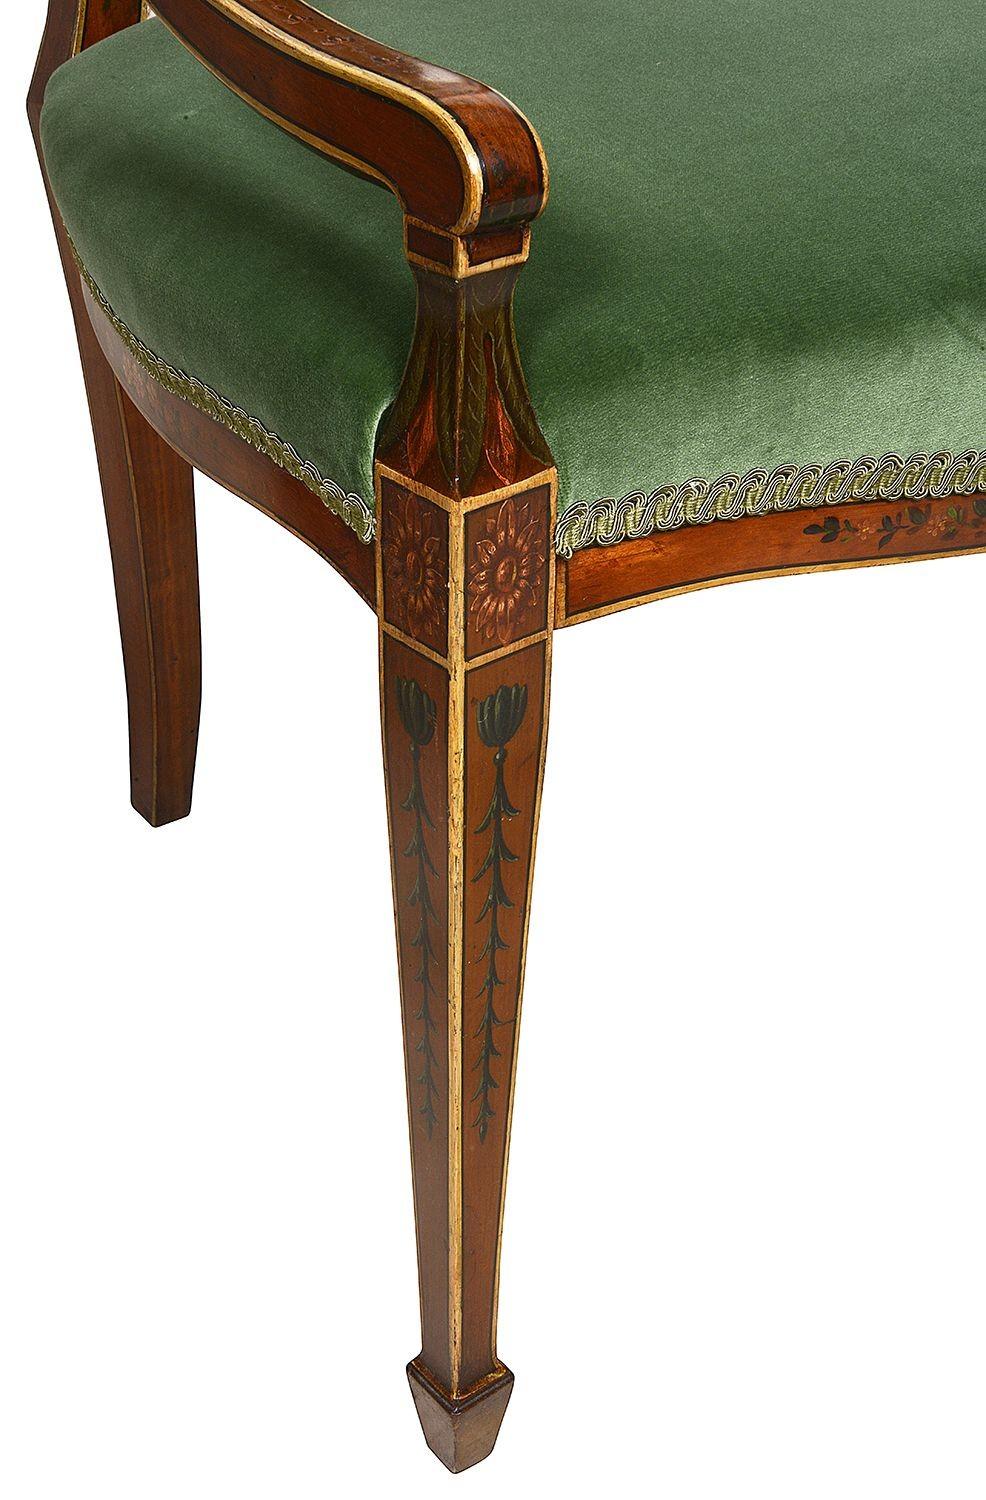 Hand-Painted 19th Century Sheraton style arm chair For Sale